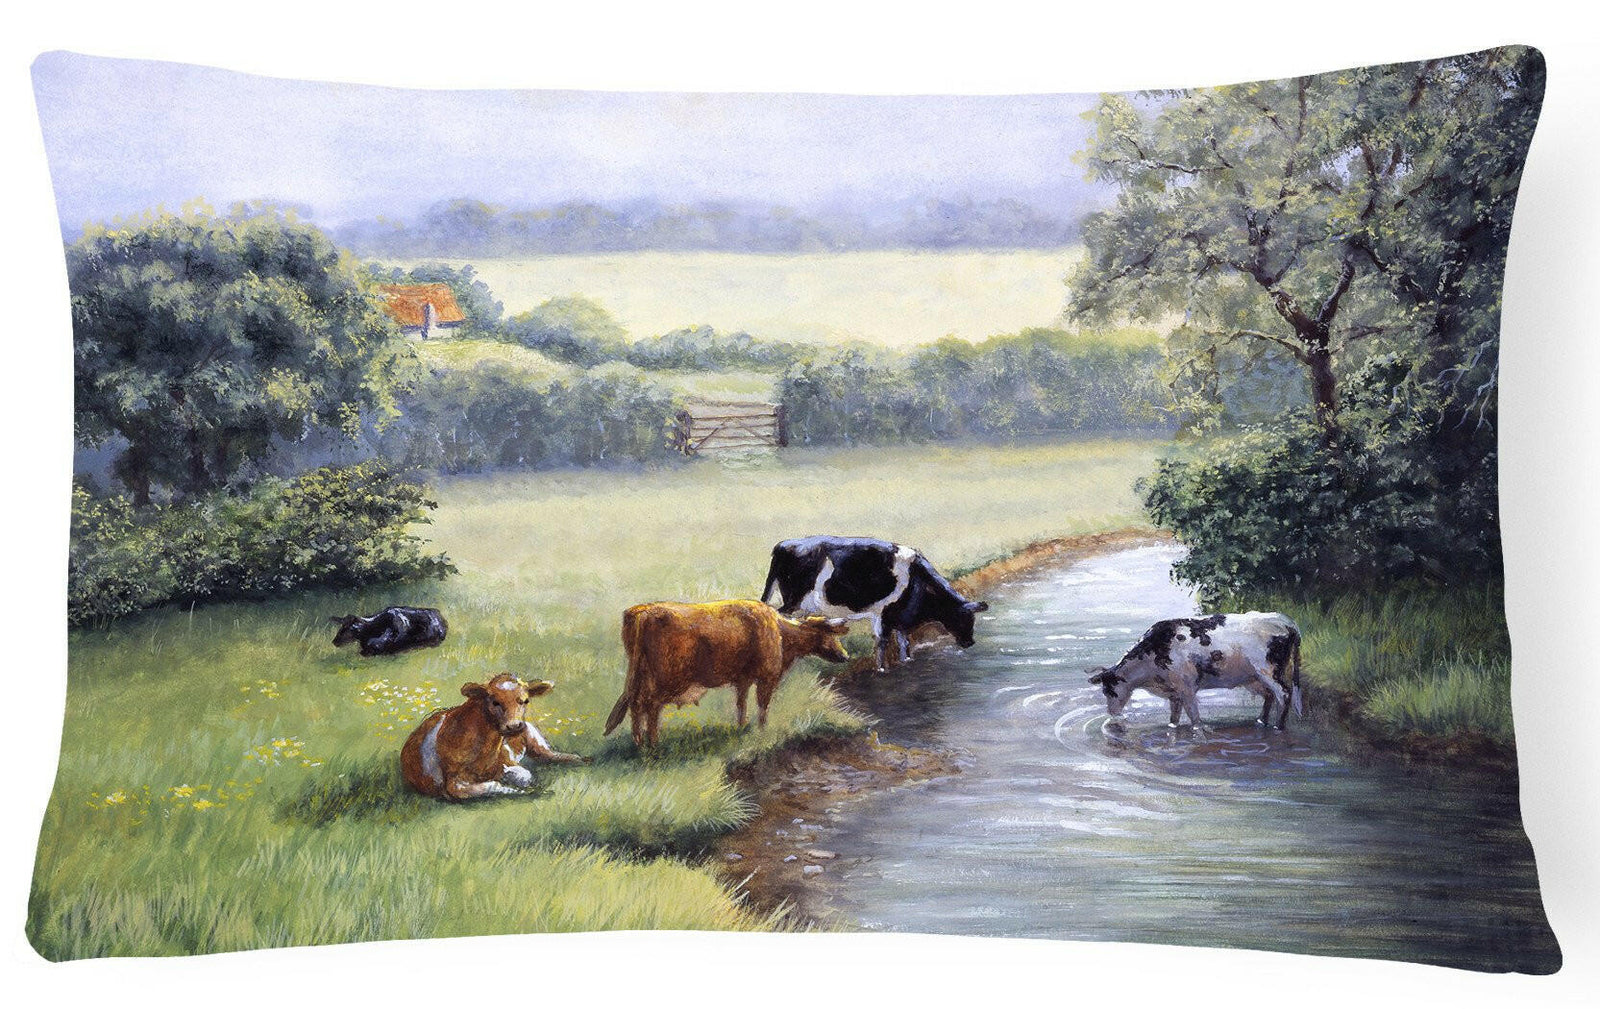 Cows Drinking at the Creek Bank Fabric Decorative Pillow BDBA0350PW1216 by Caroline's Treasures